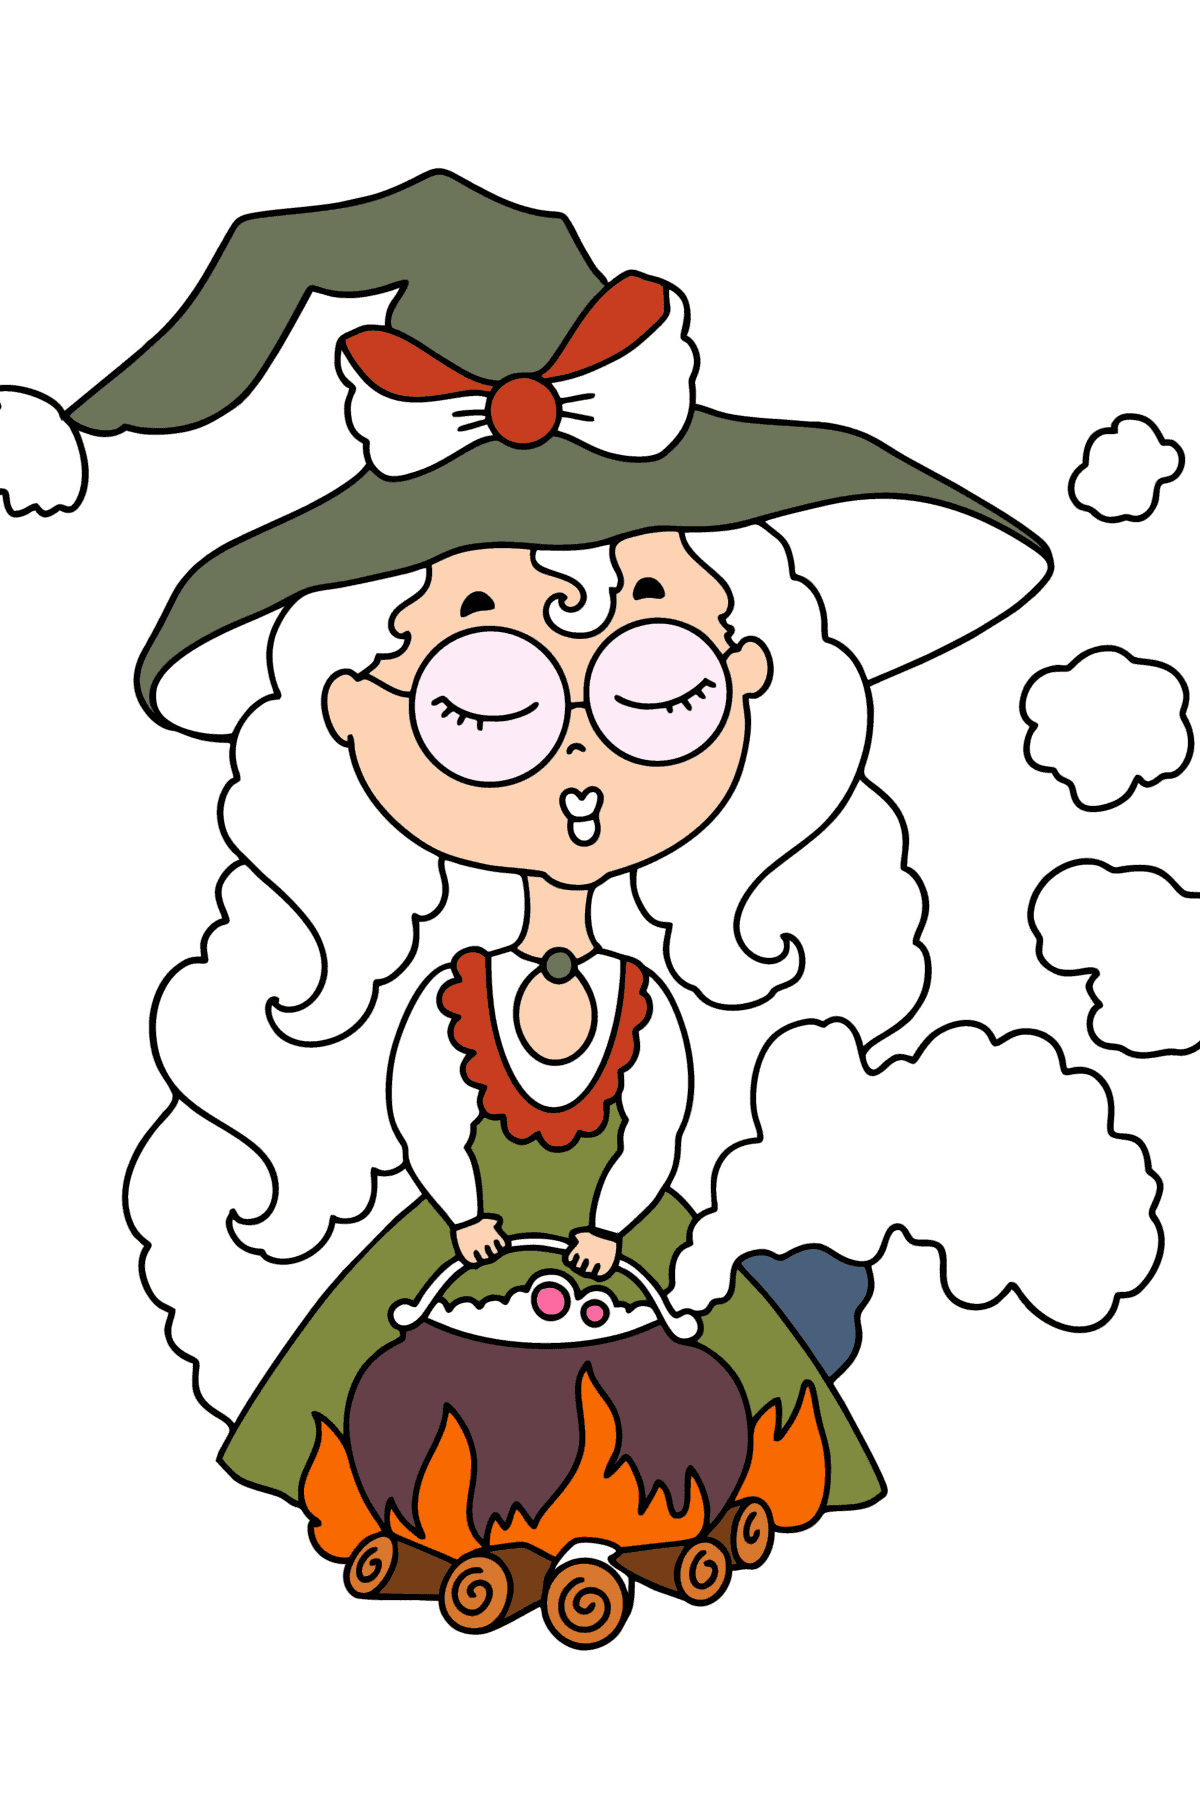 Witch brews a potion сolouring page - Coloring Pages for Kids